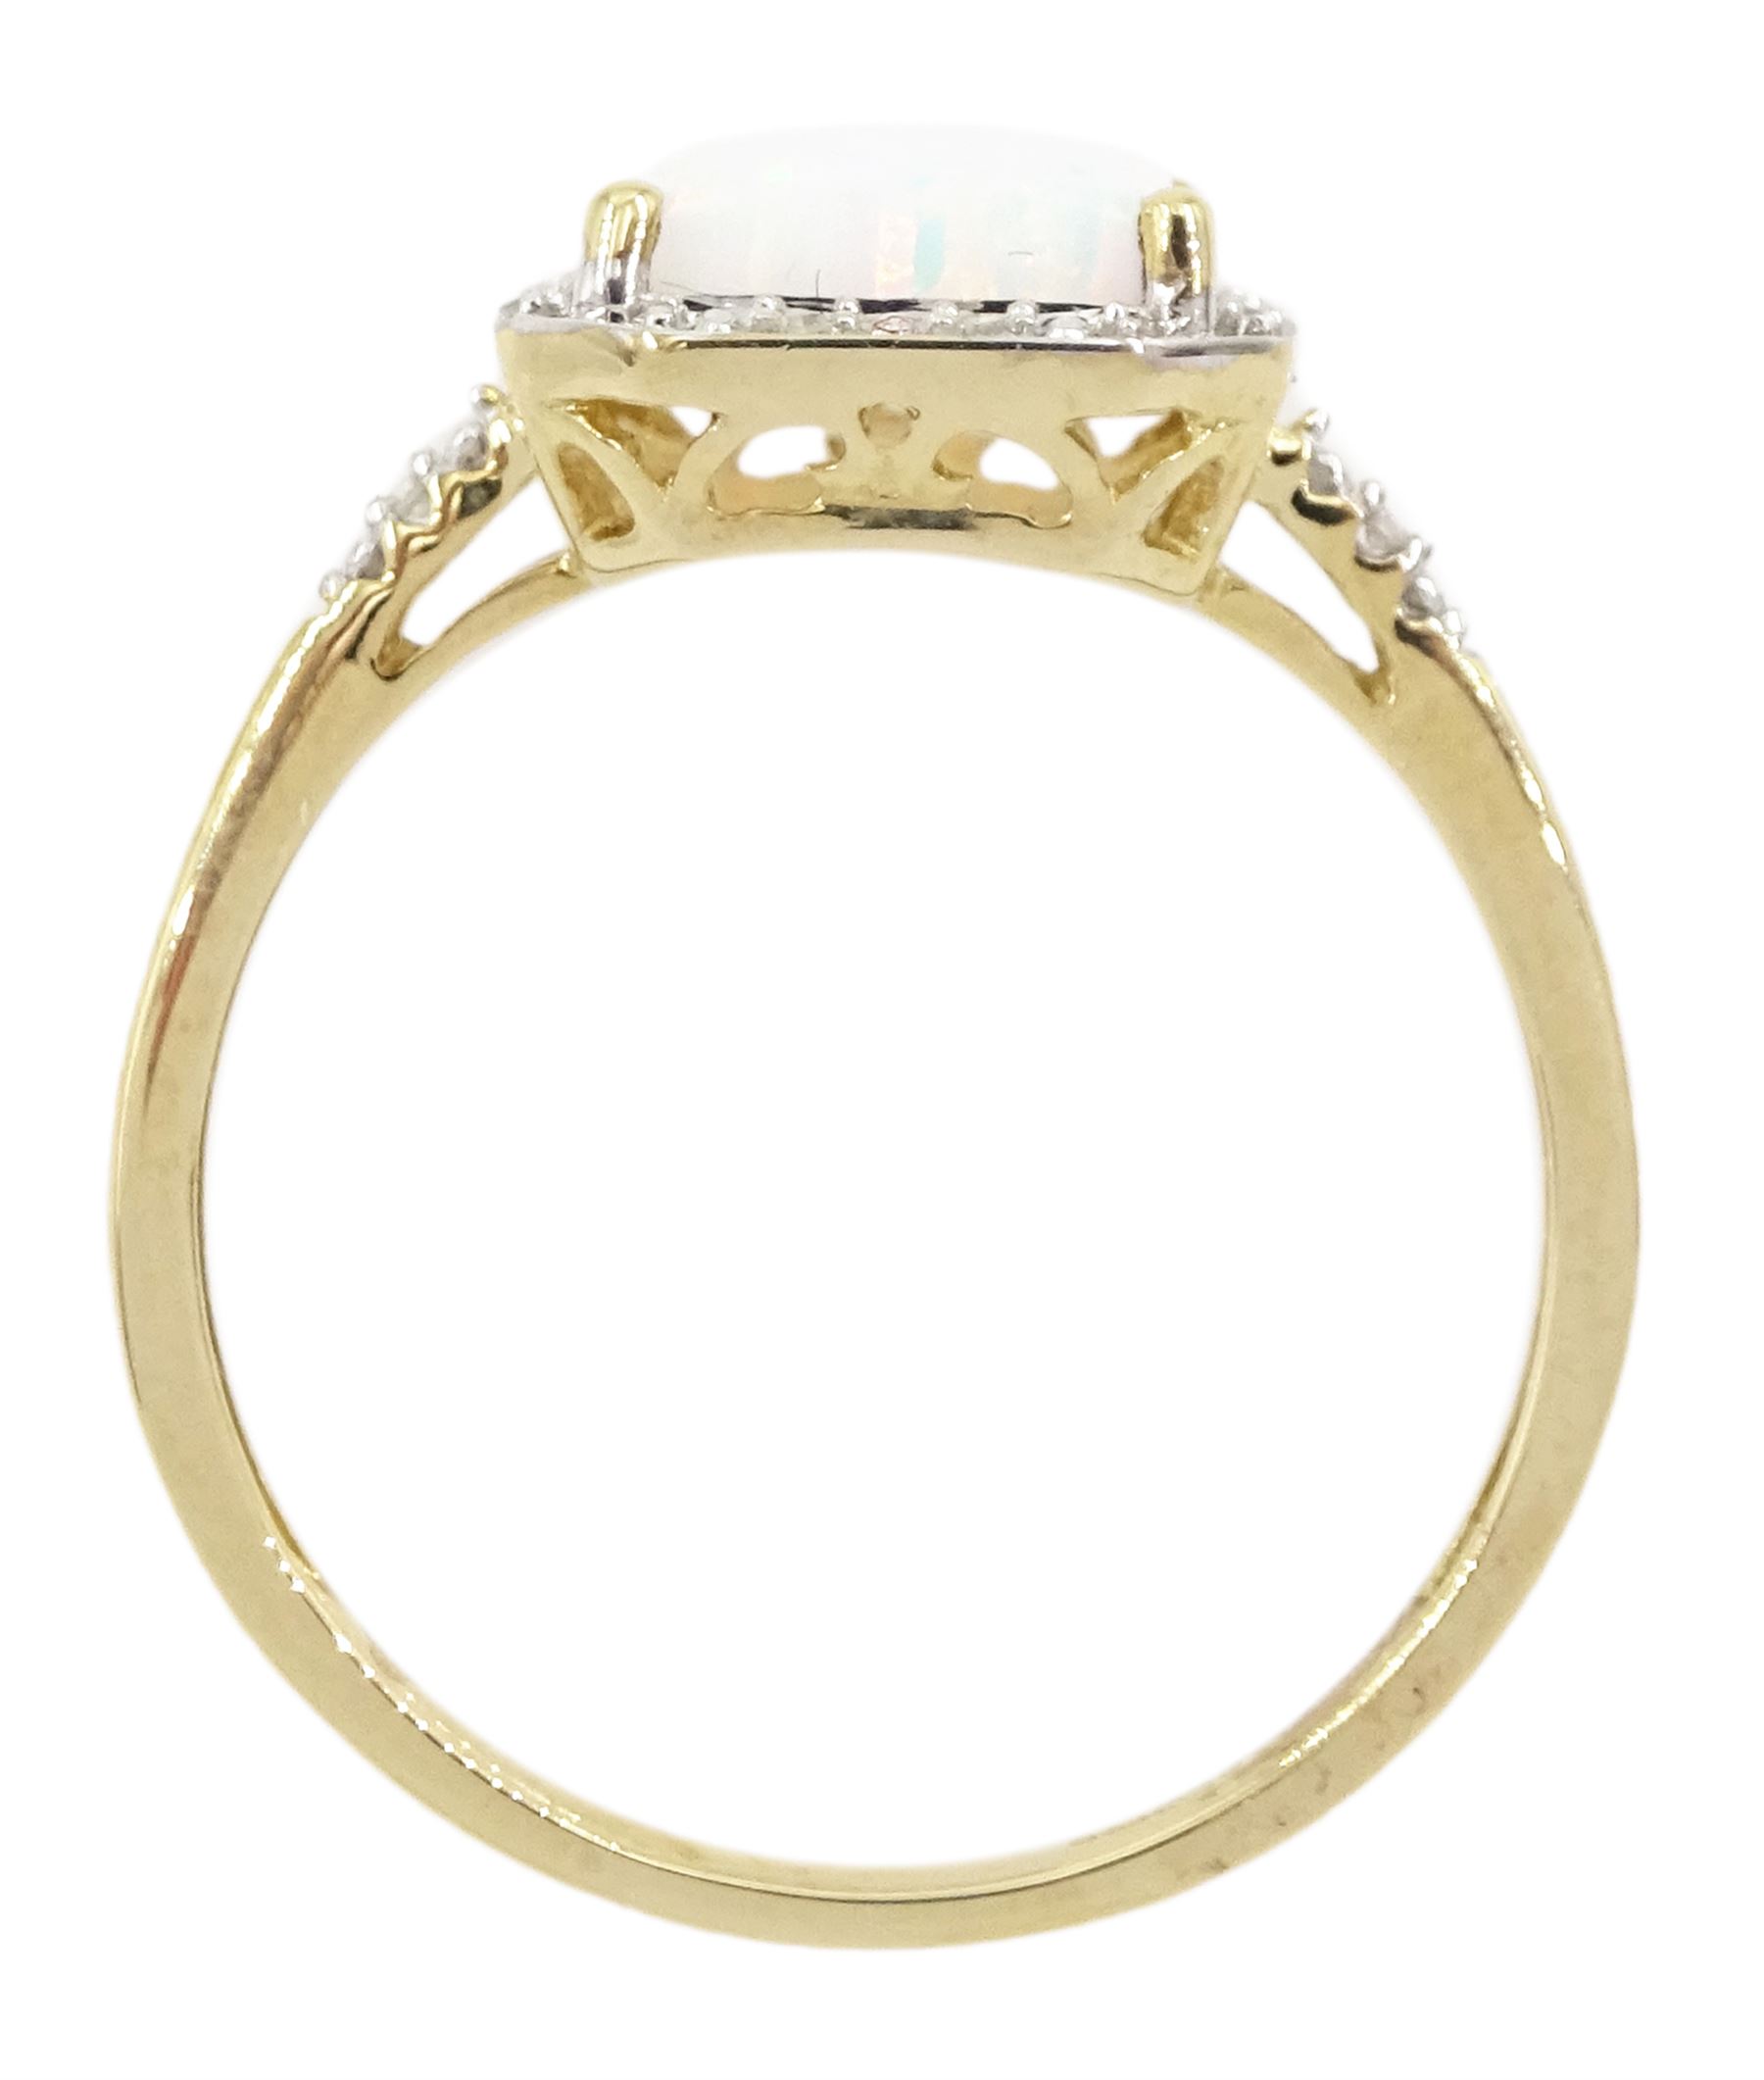 9ct gold opal and diamond cluster ring - Image 4 of 4